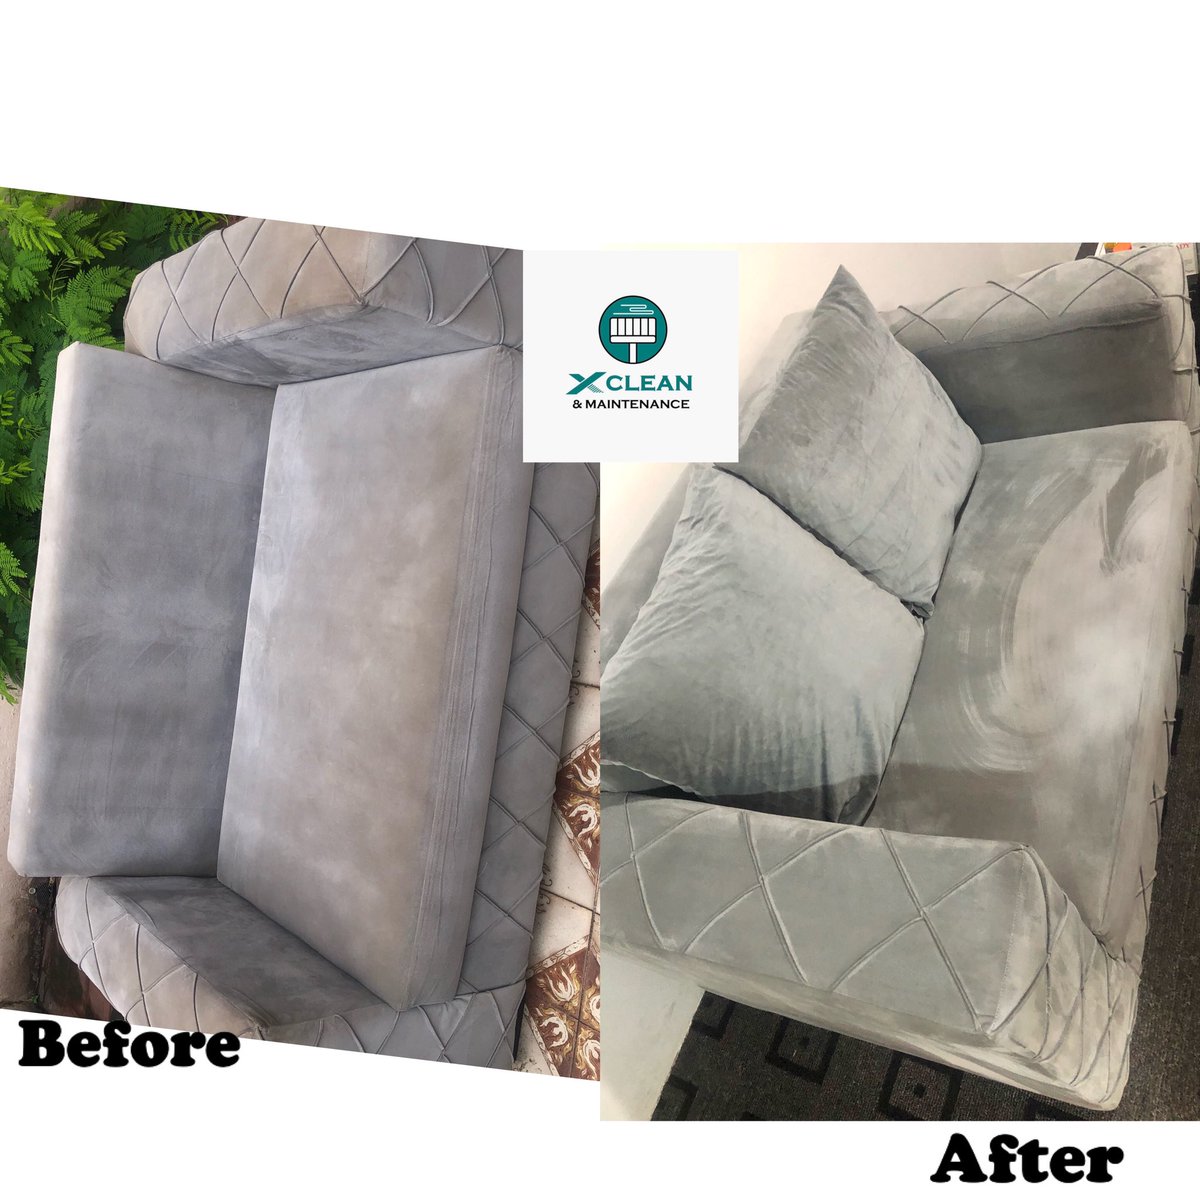 Let us get those upholstery cleaned and restored back to it factory settings… send us a DM

#upholsteryCleaning
#cleaningExperts
#minna